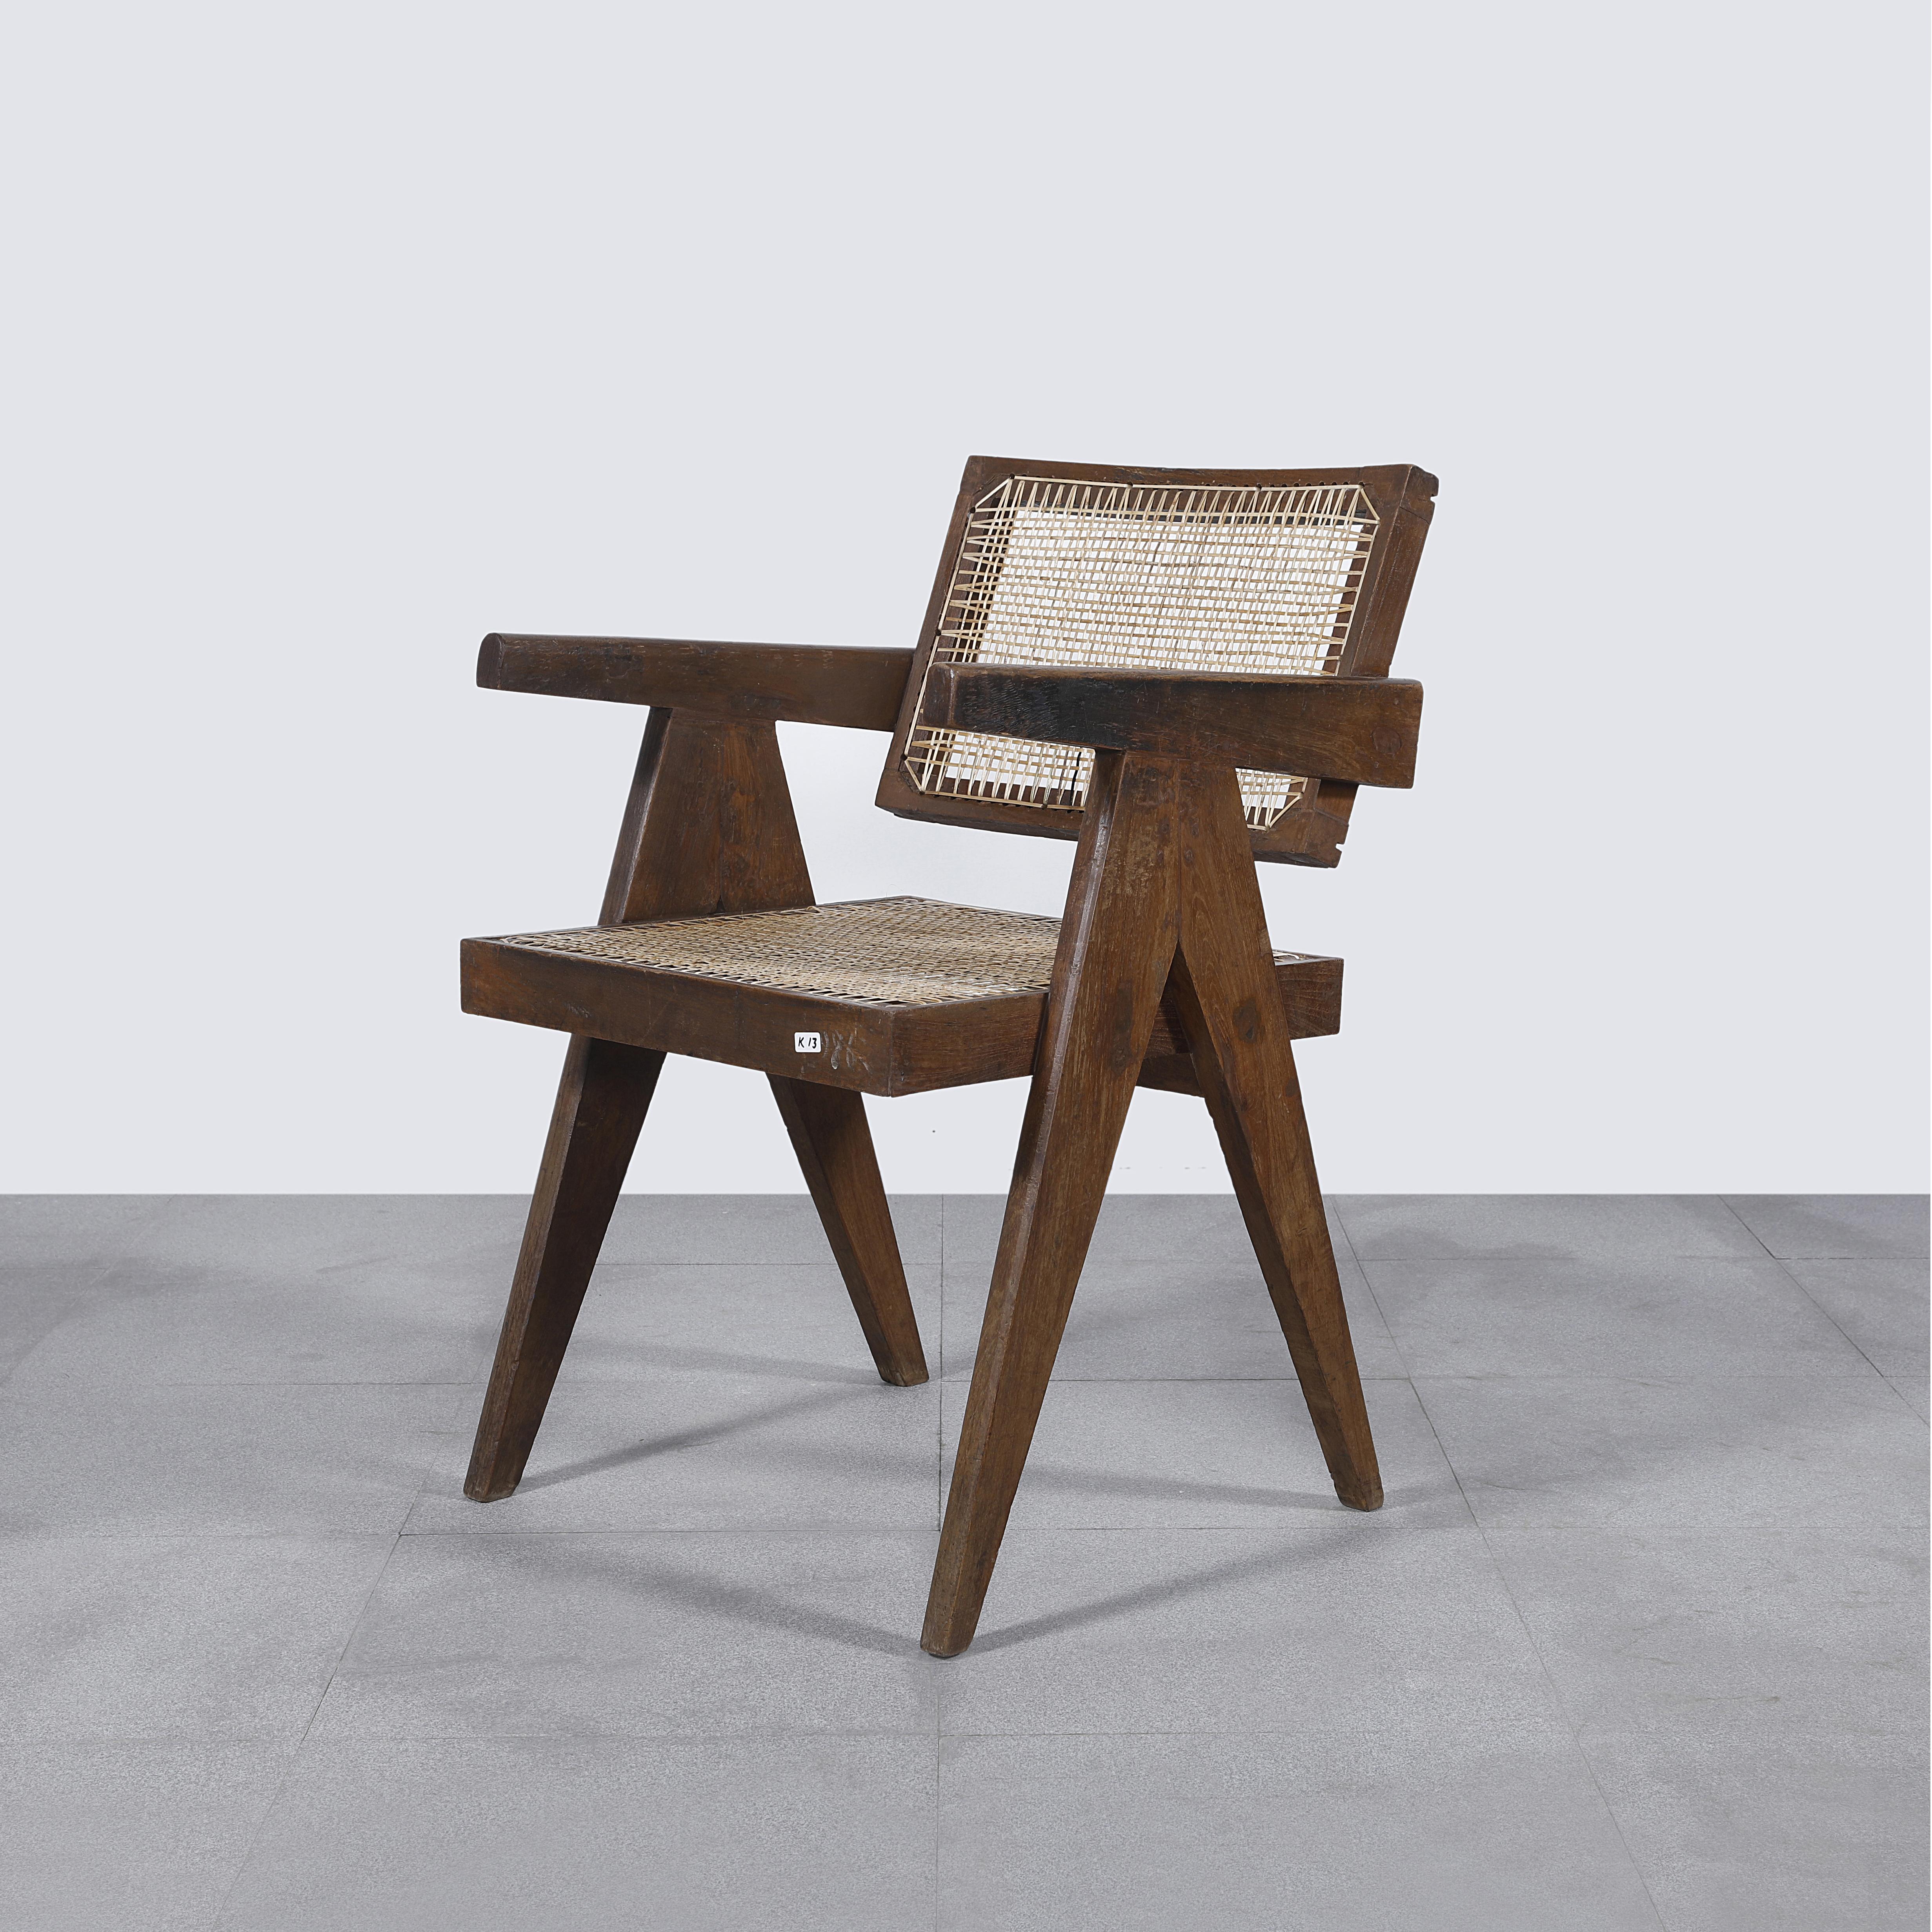 Chair has patinated teak, which gives that chair a strong character, showing all that traces of age and its uniqueness. This piece has authentic letters on the backside that makes it even more valuable, showing a part of the history of Chandigarh.